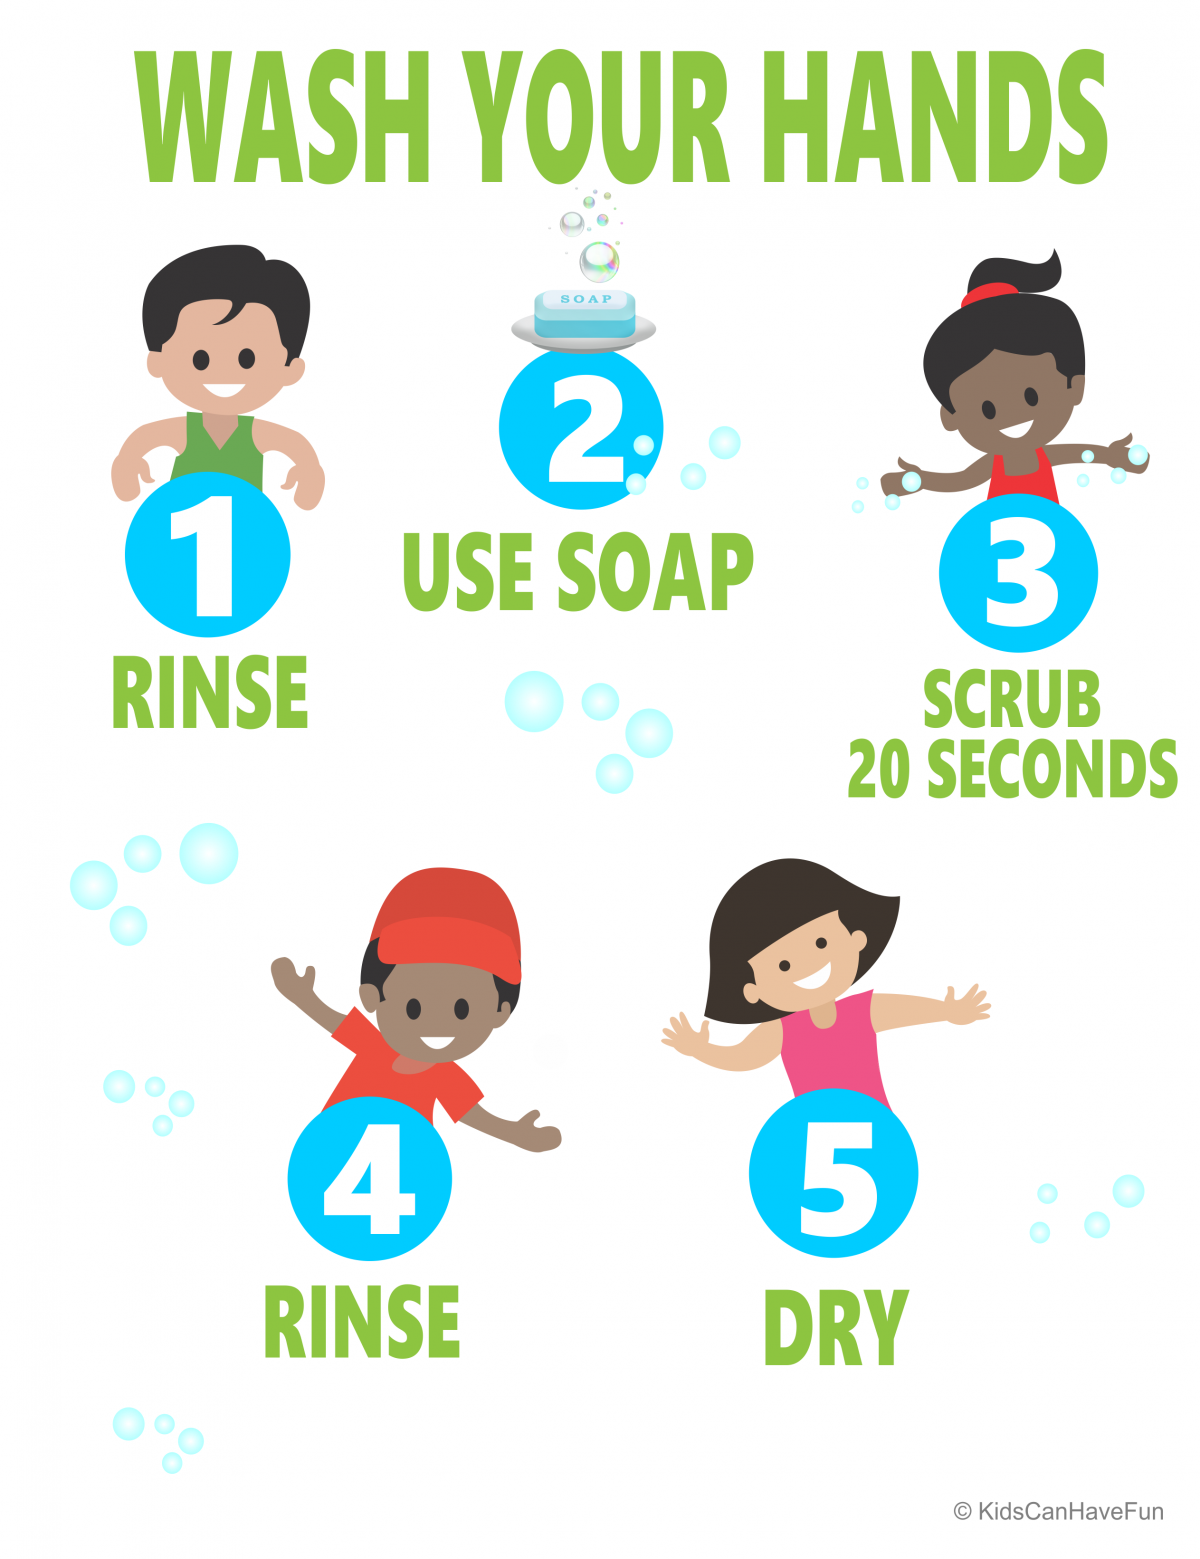 Proper Hand Washing Posters • KidsCanHaveFun Blog - Play, Explore and Learn